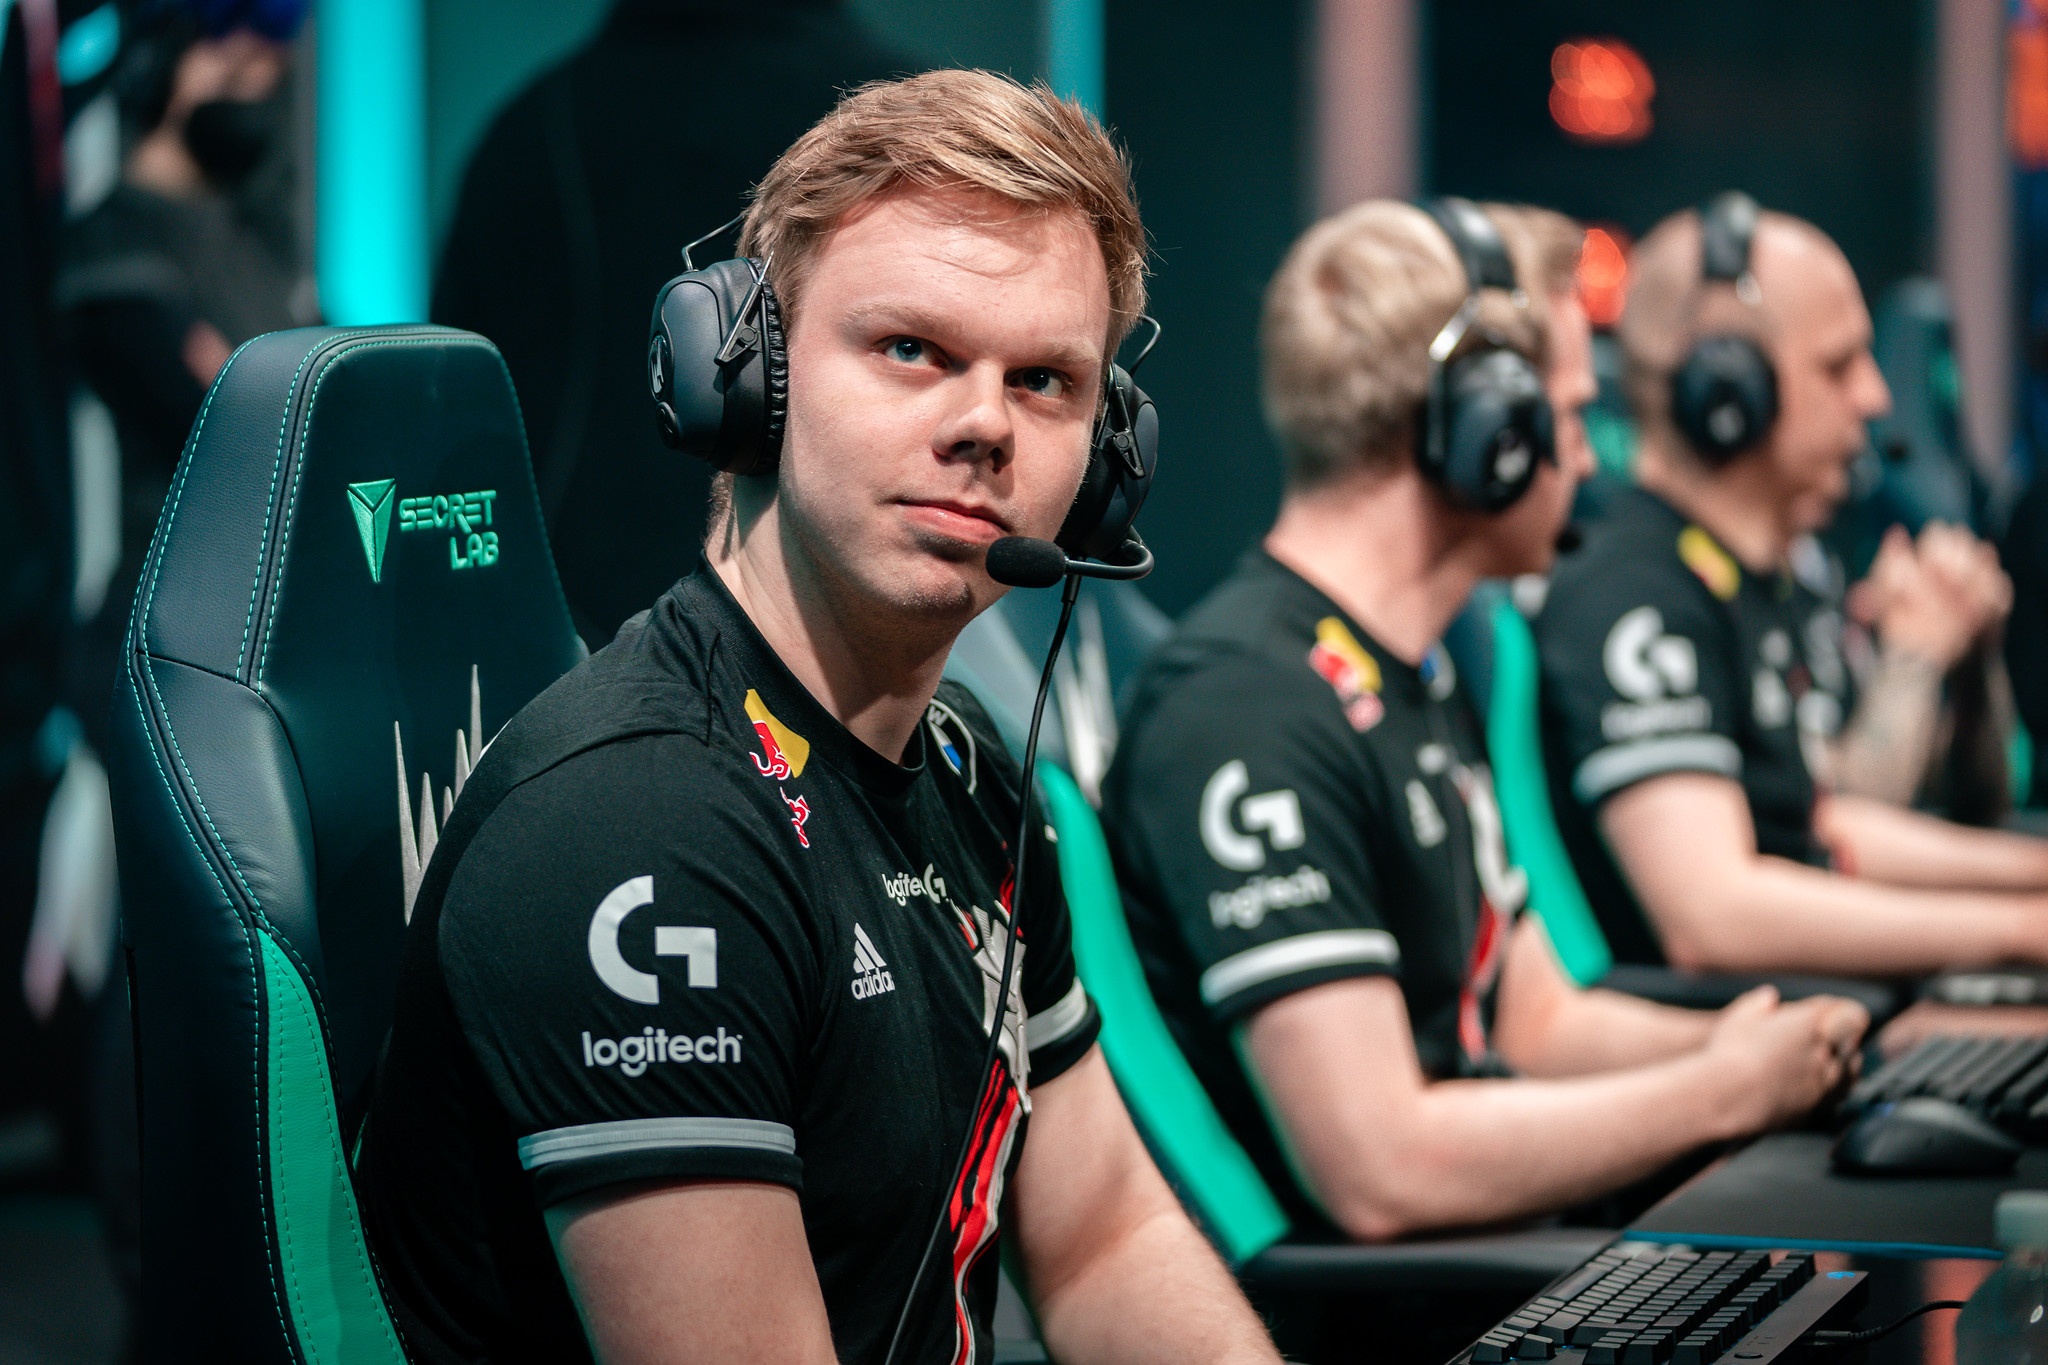 Sources: Fnatic signing Wunder as new LEC top laner - Dot Esports